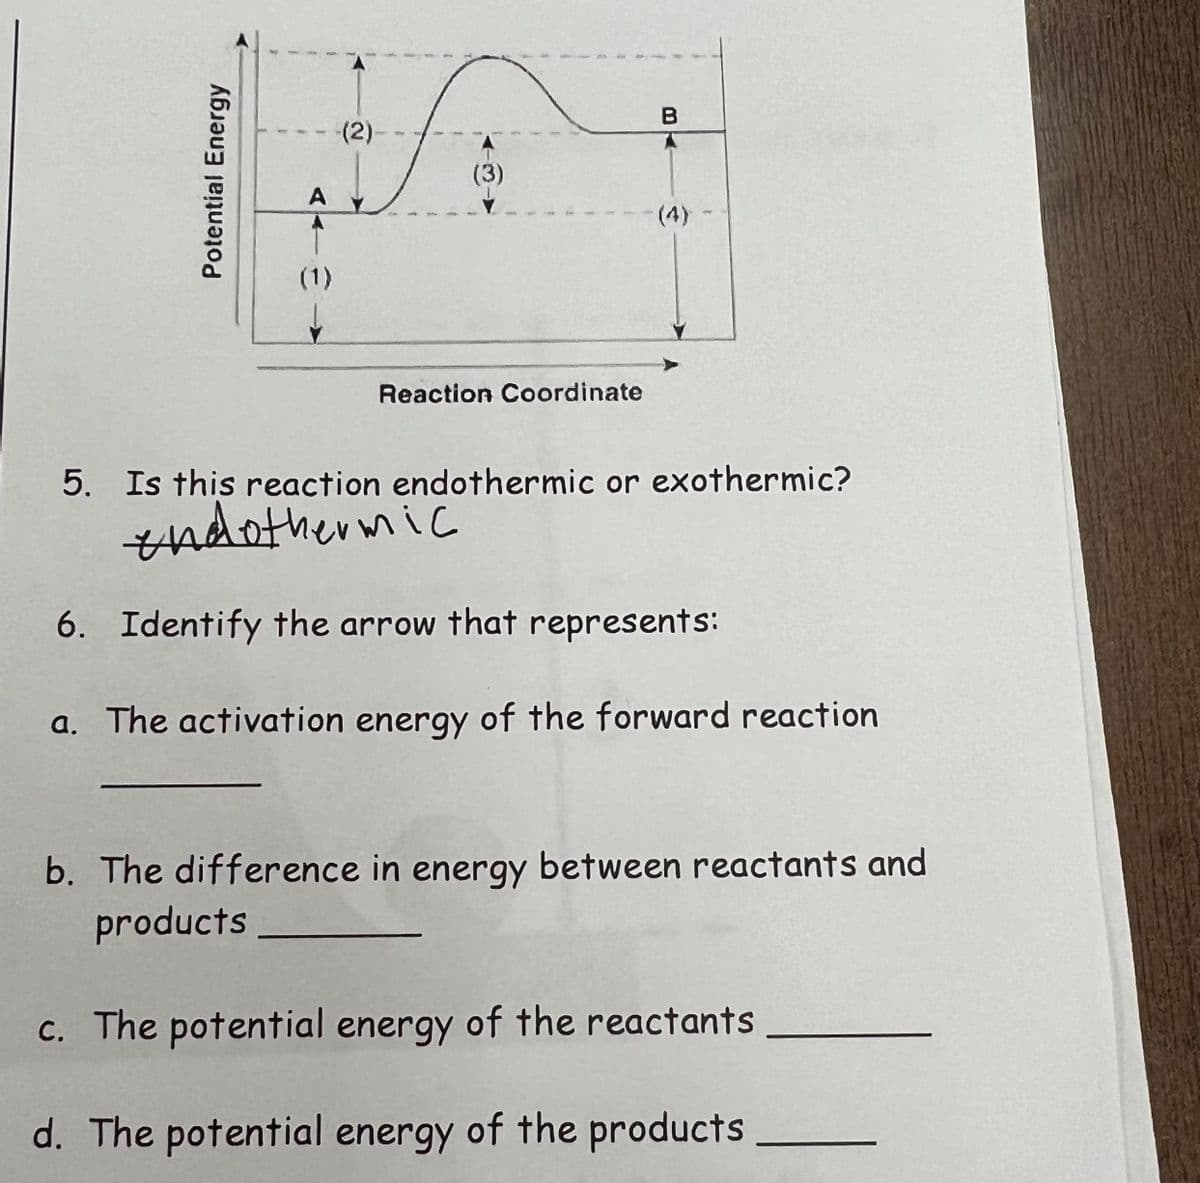 (2)
A
(4)
(1)
Reaction Coordinate
5. Is this reaction endothermic or exothermic?
¥ndothermic
6. Identify the arrow that represents:
a. The activation energy of the forward reaction
b. The difference in energy between reactants and
products
c. The potential energy of the reactants
d. The potential energy of the products
Potential Energy
